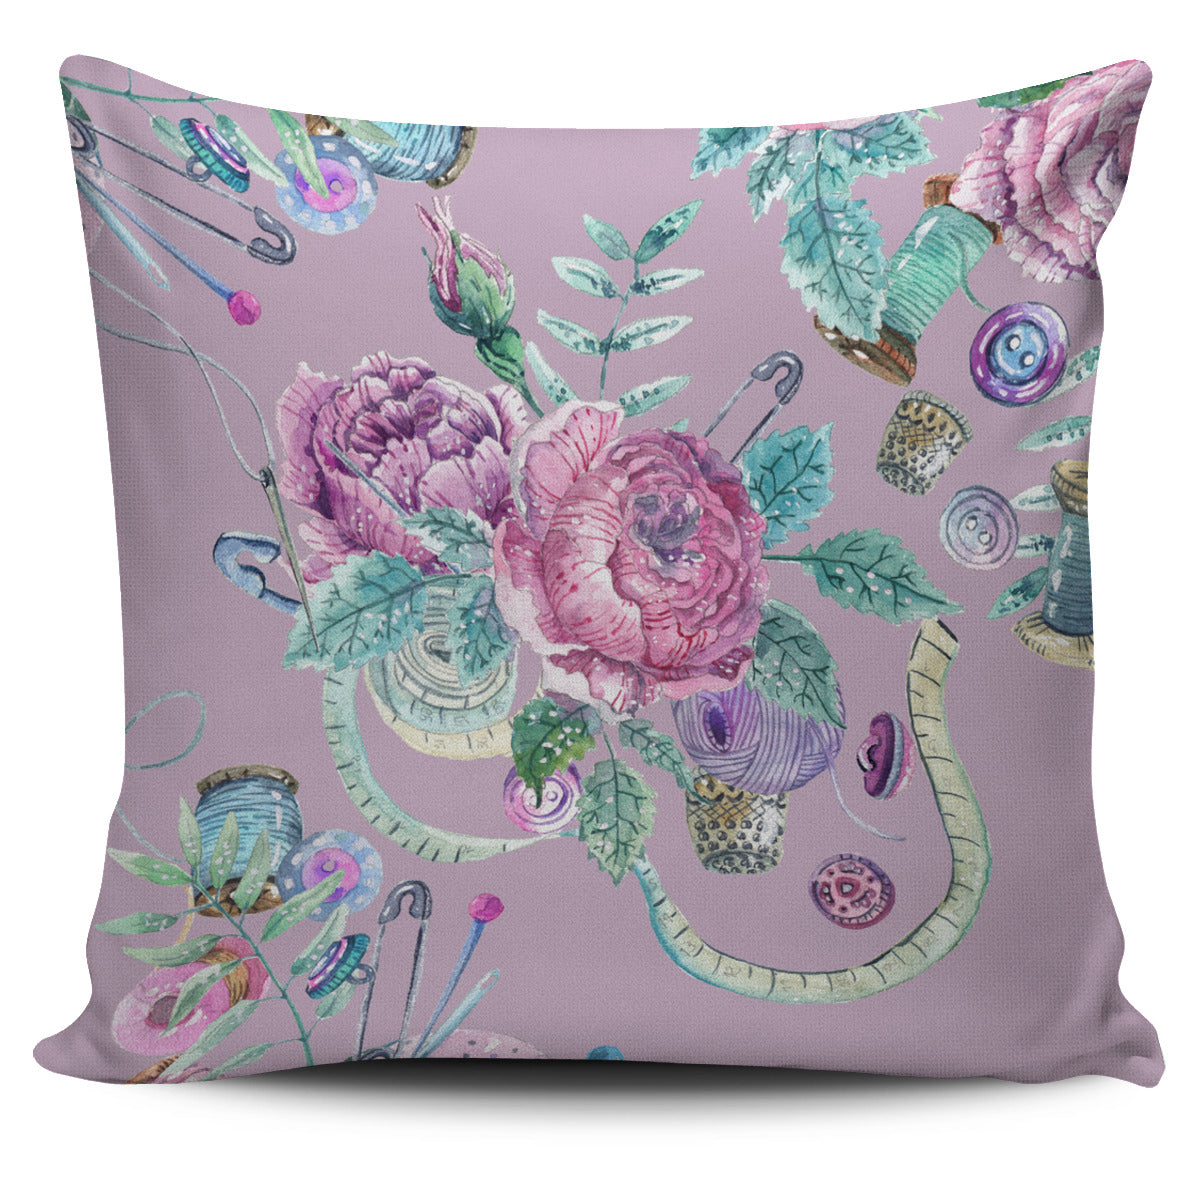 Watercolor Sewing Pillow Cover